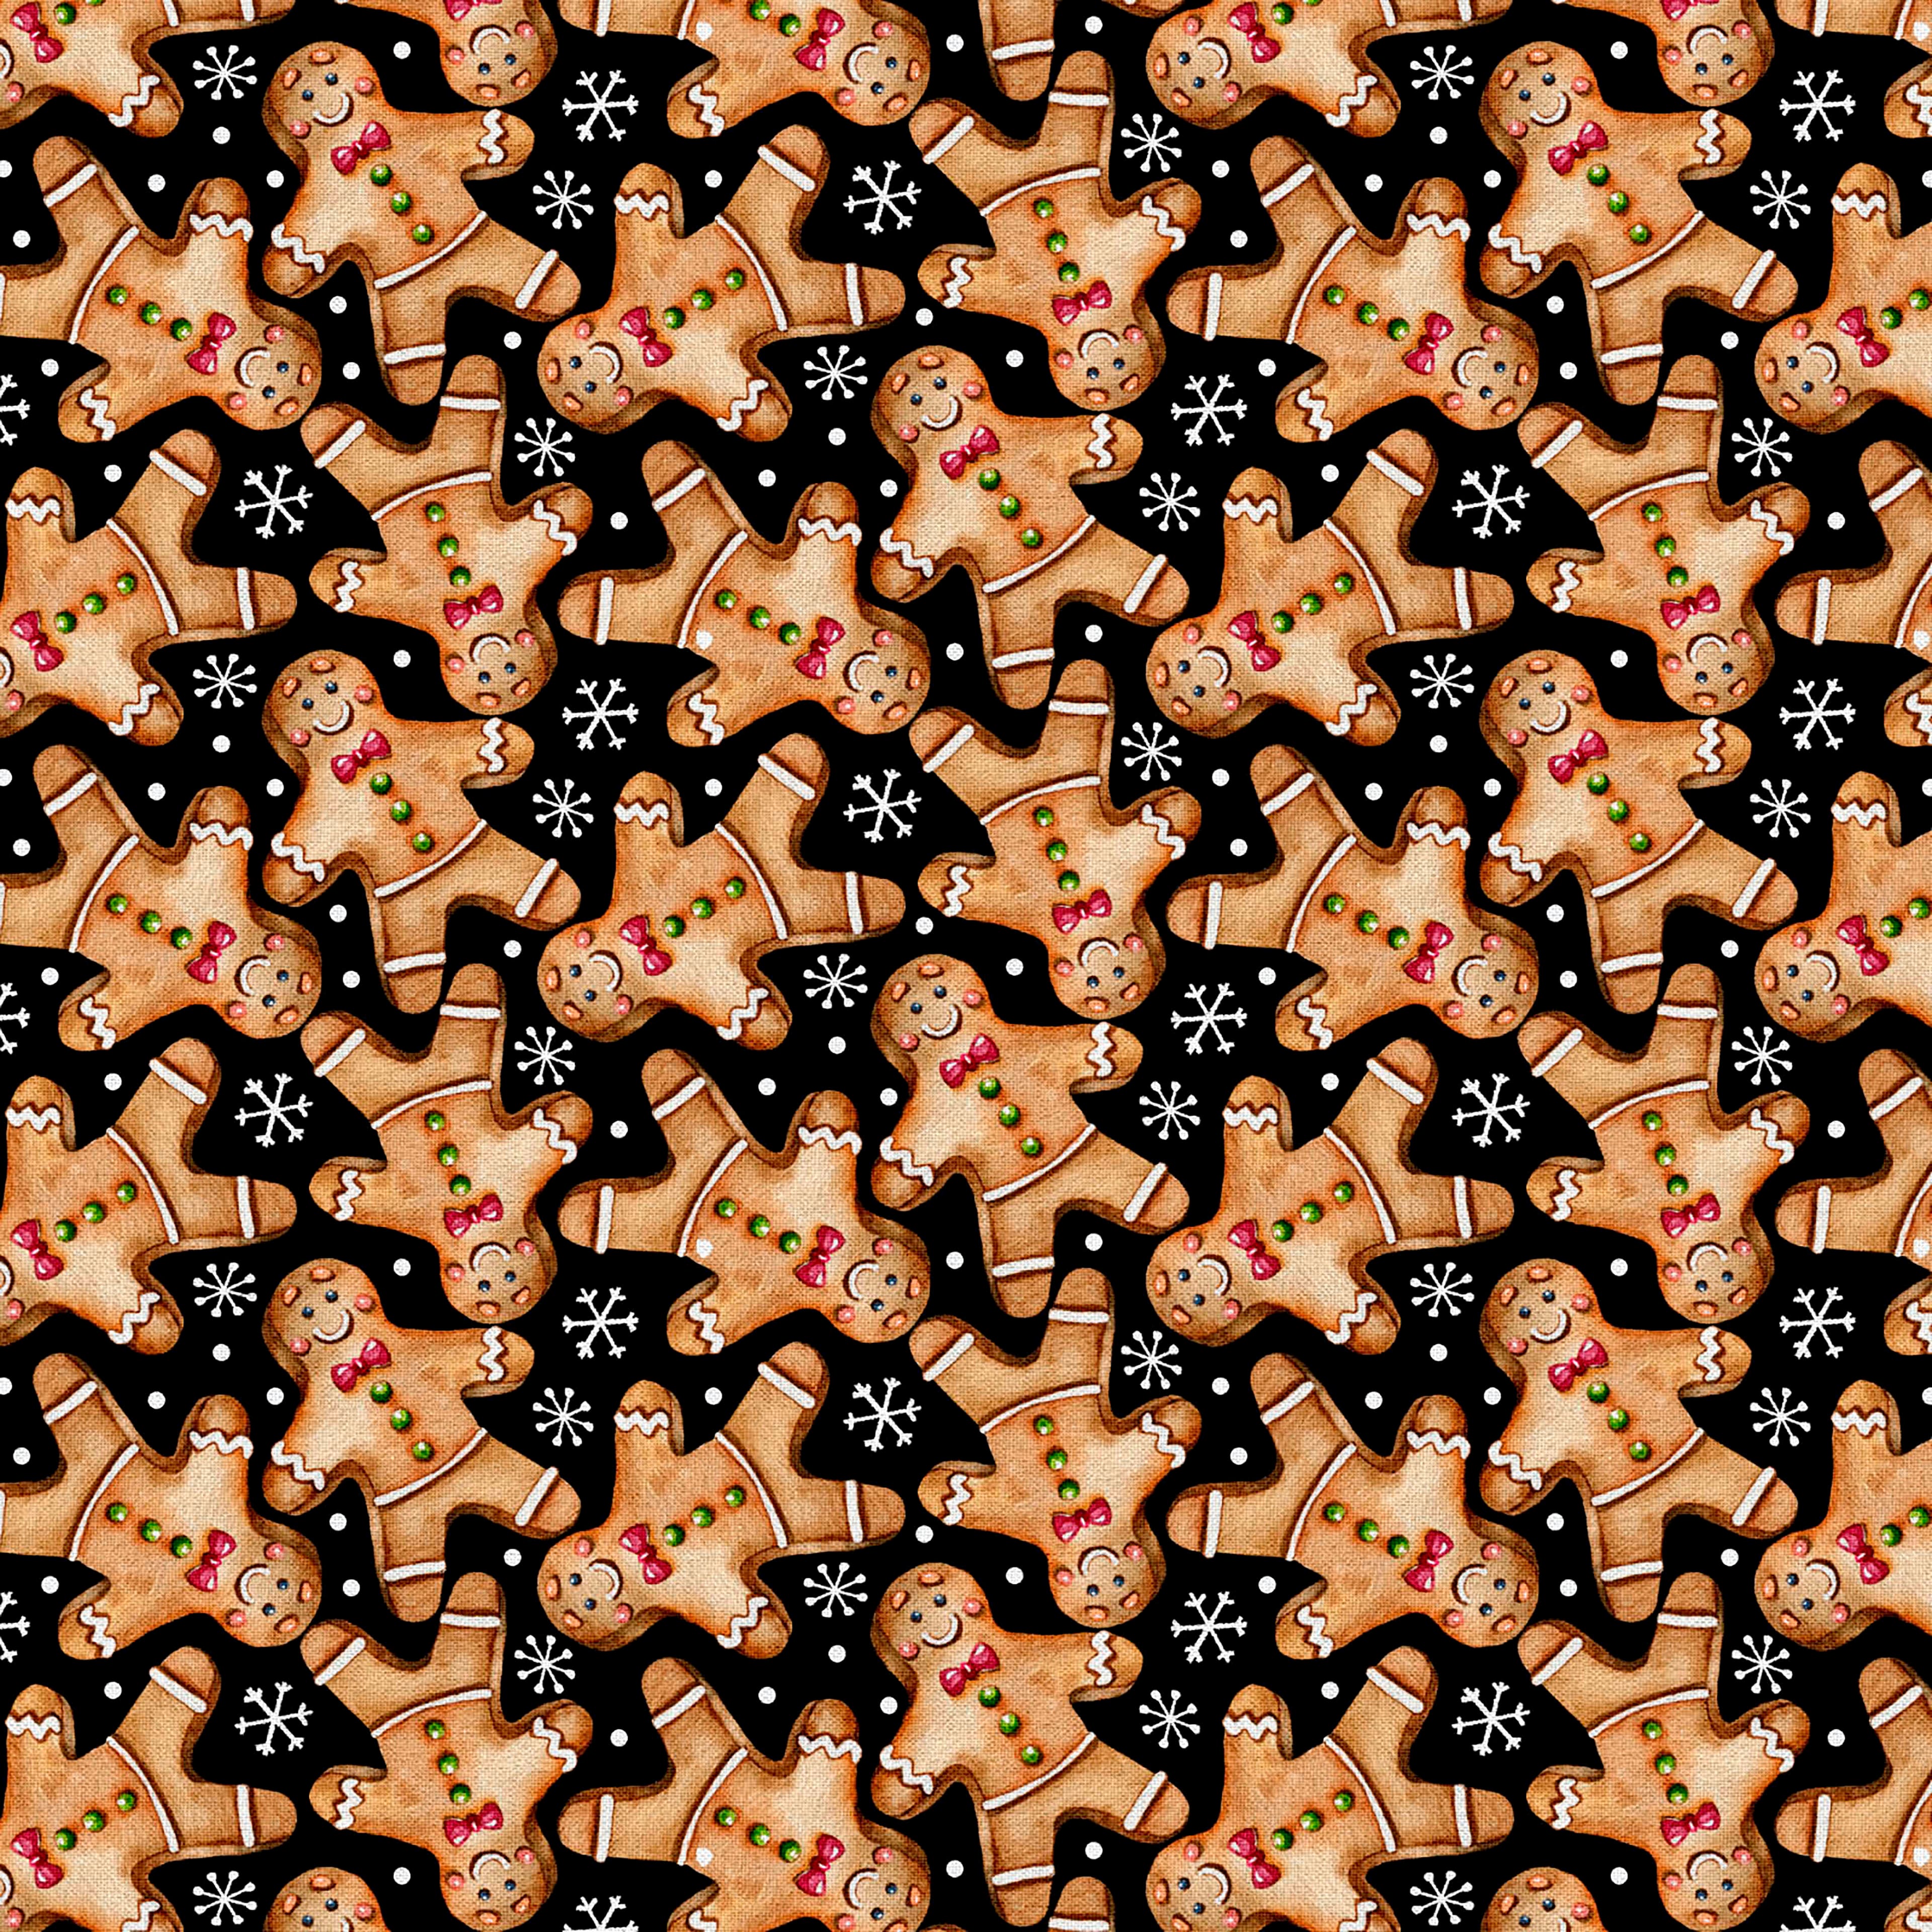 Fabric Editions Gingerbread Cookies Cotton Fabric